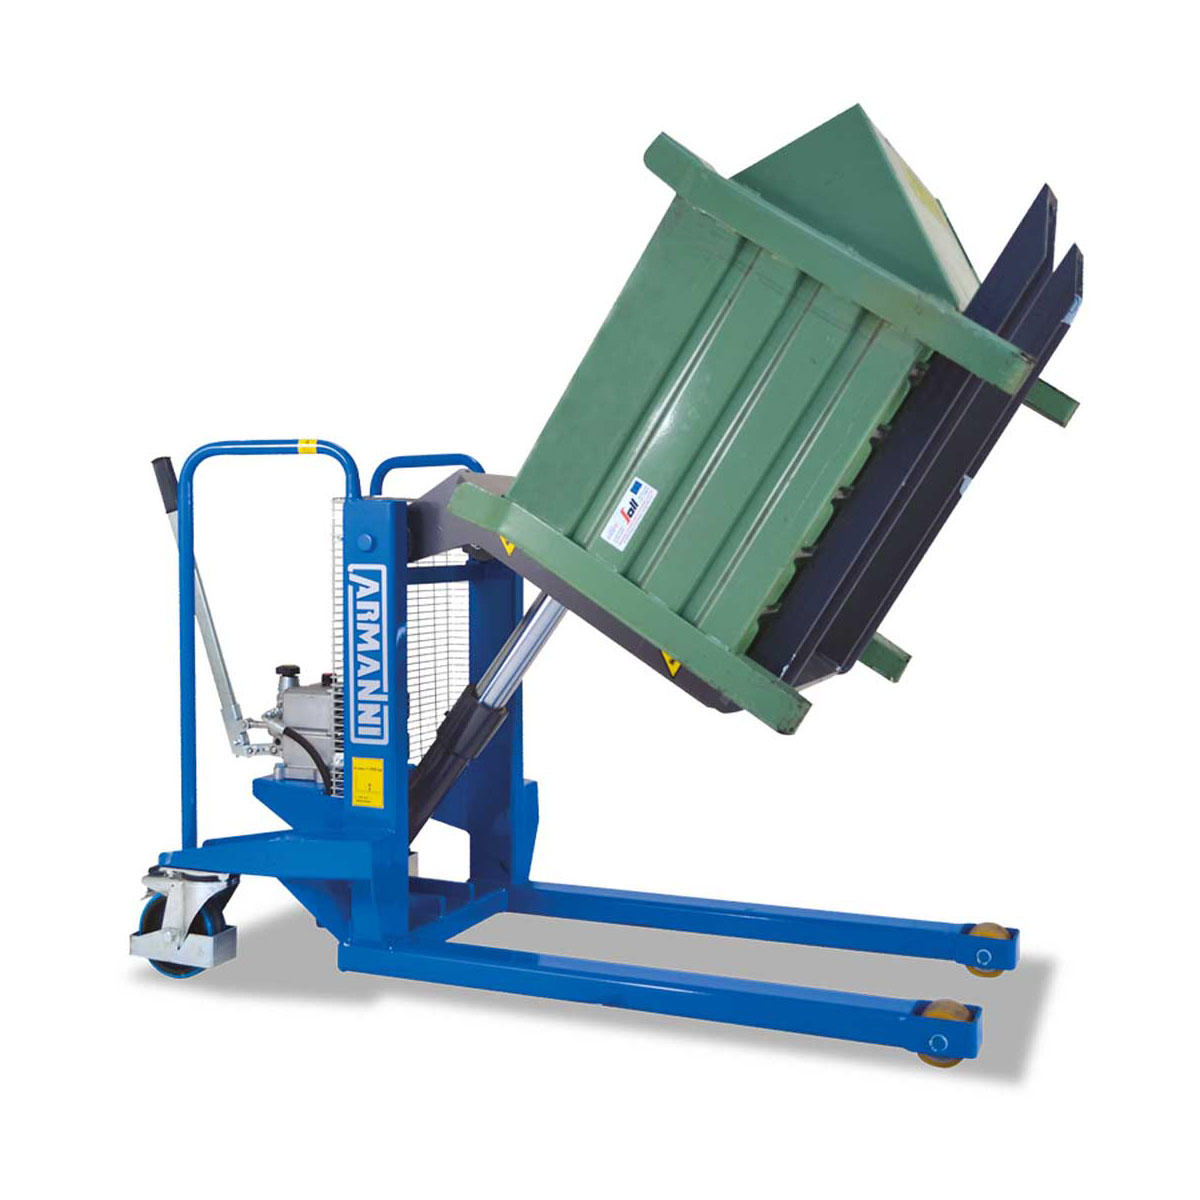 Buy Tipping Forks Lifter (Pump) in Utility Lifters | Materials Handling Lift Towers from Armanni available at Astrolift NZ